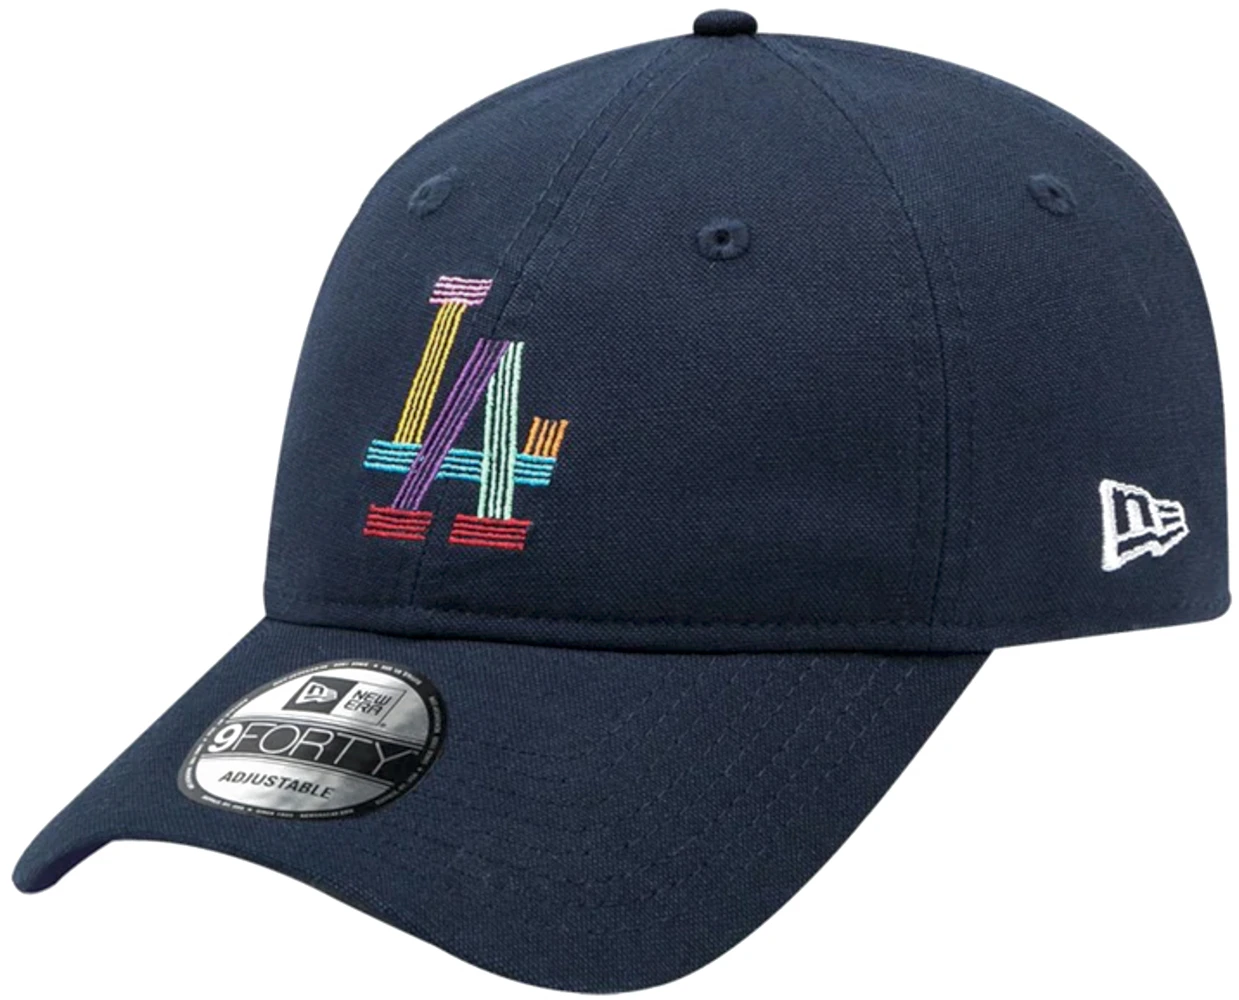 New Era - Los Angeles Dodgers 9FORTY - Scarlet/White